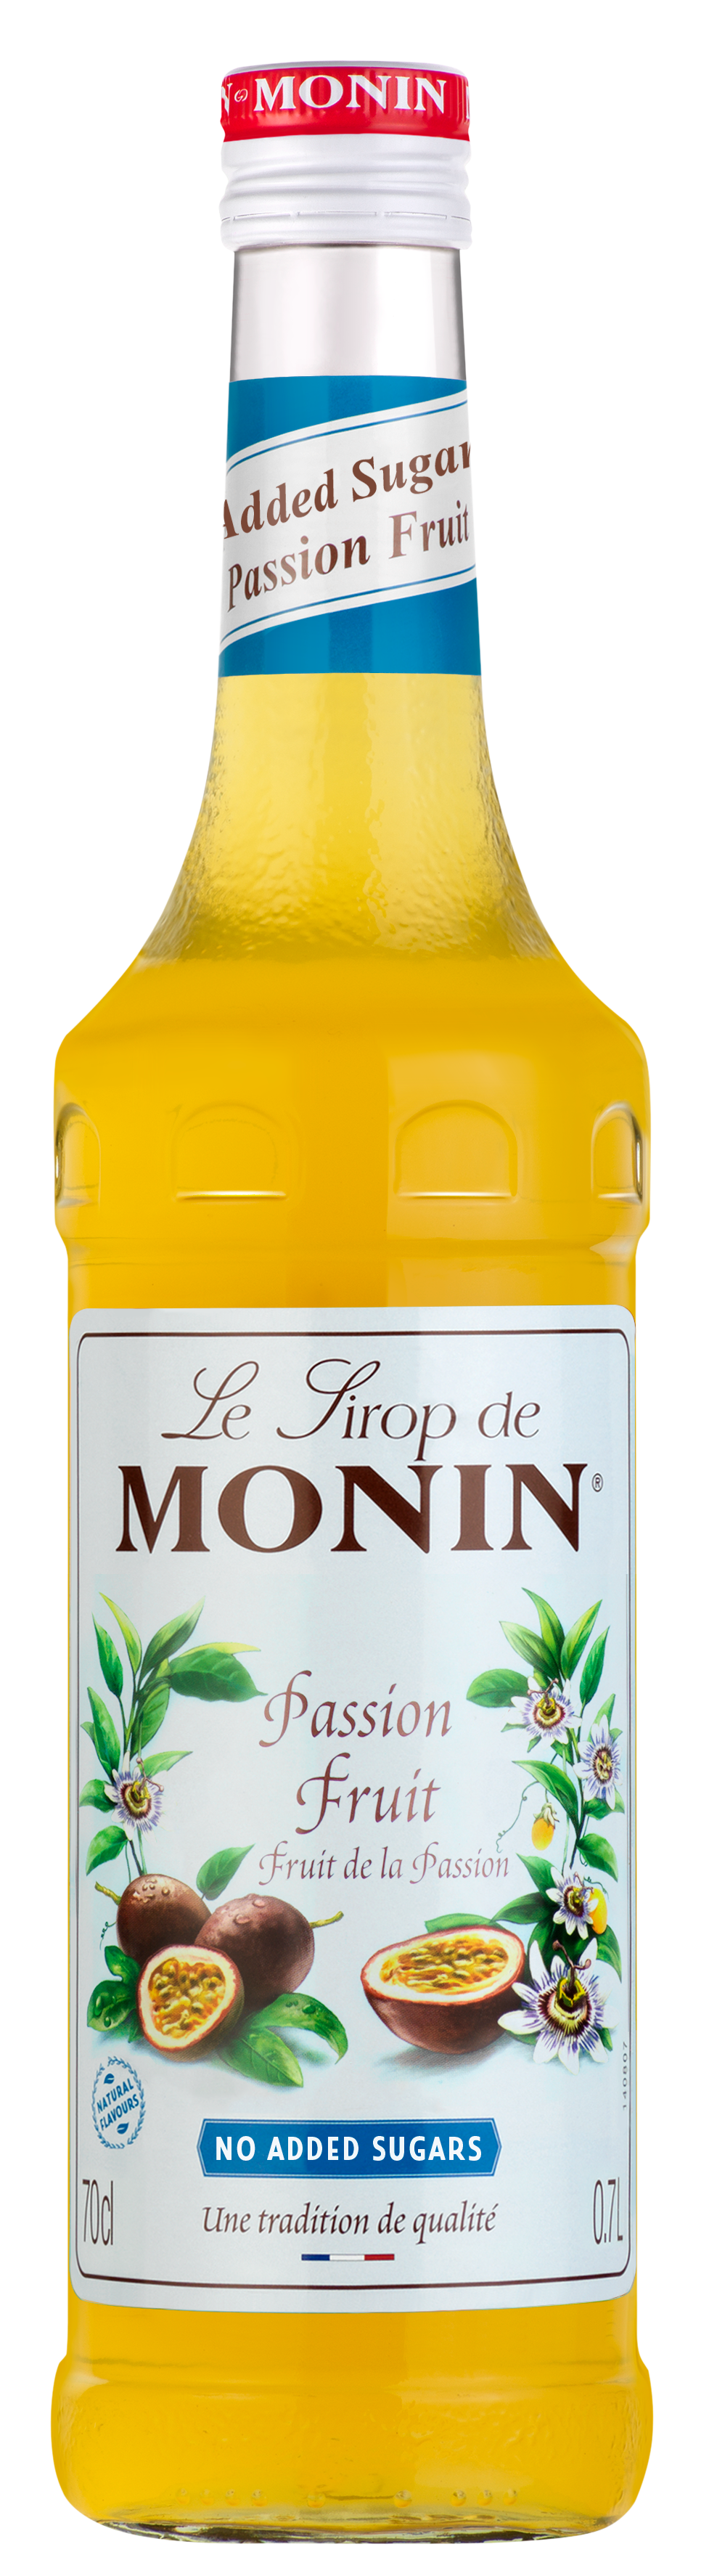 Buy MONIN No Added Sugar Passion Fruit syrup. It delivers juicy flavour & tropical bouquet of this classic summertime fruit. 